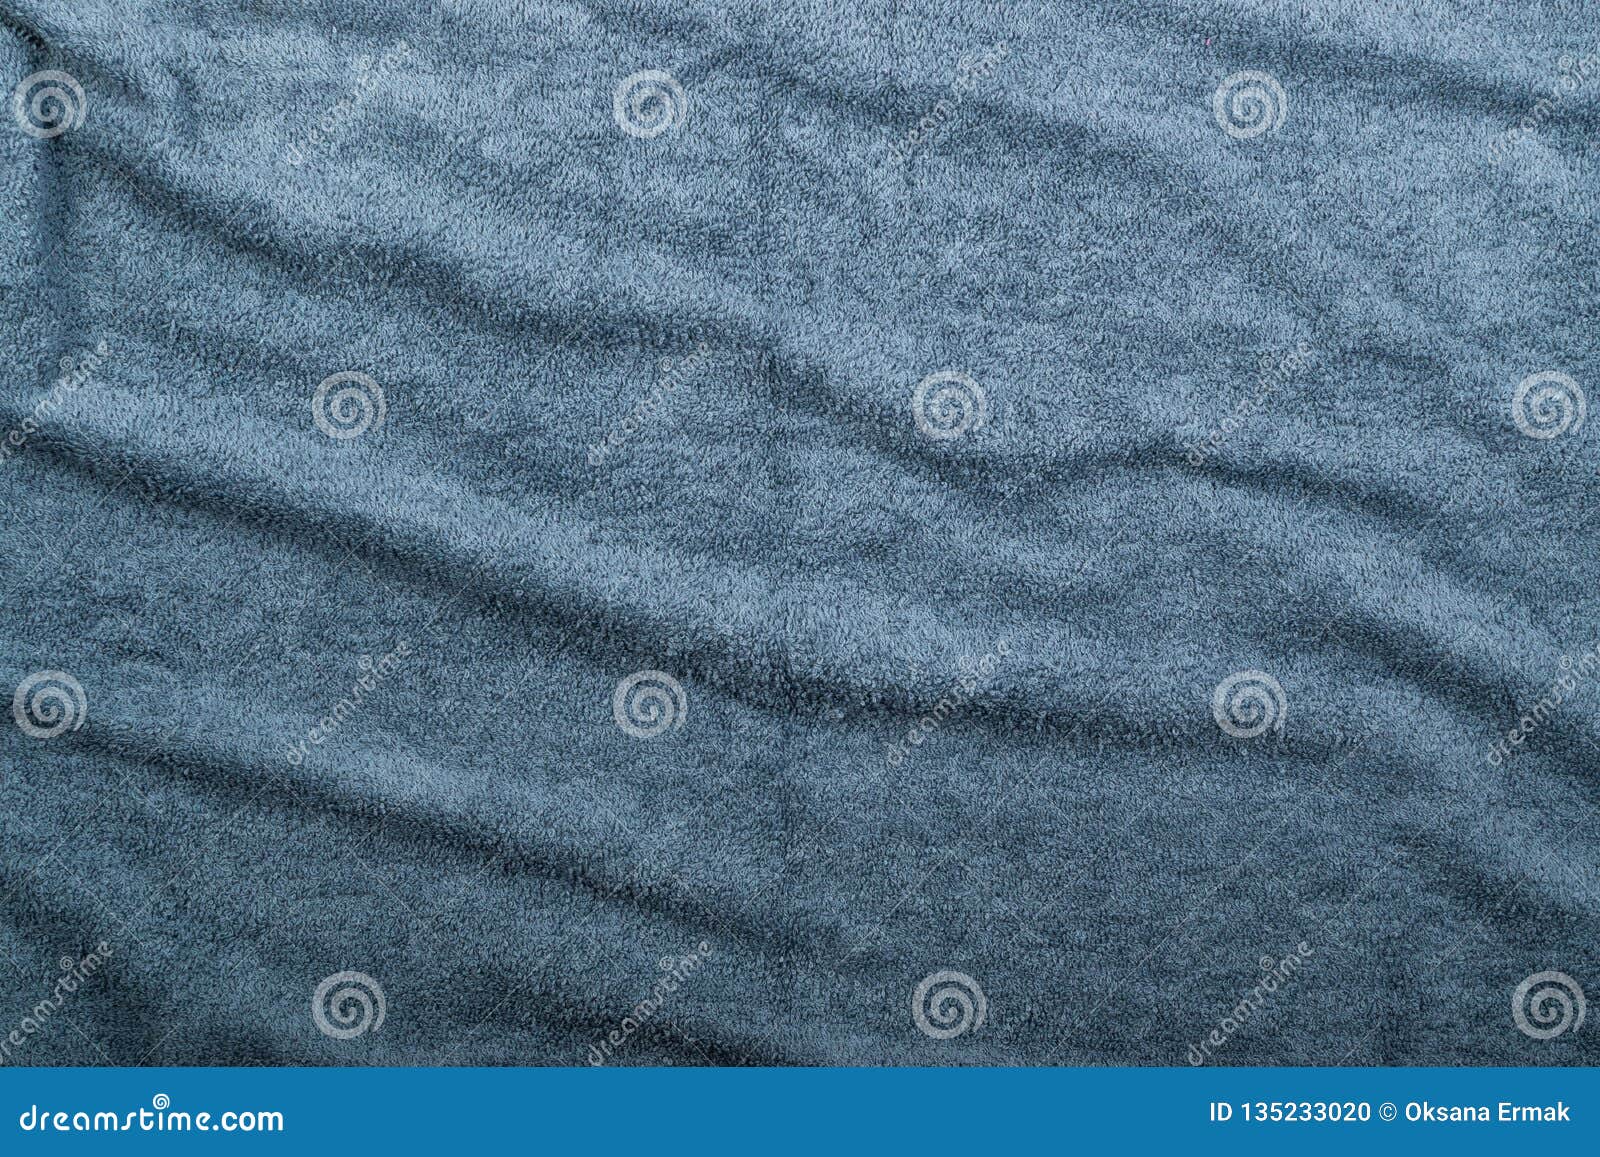 Gray Hotel Towel Wave Texture or Material Close Up Stock Photo - Image ...